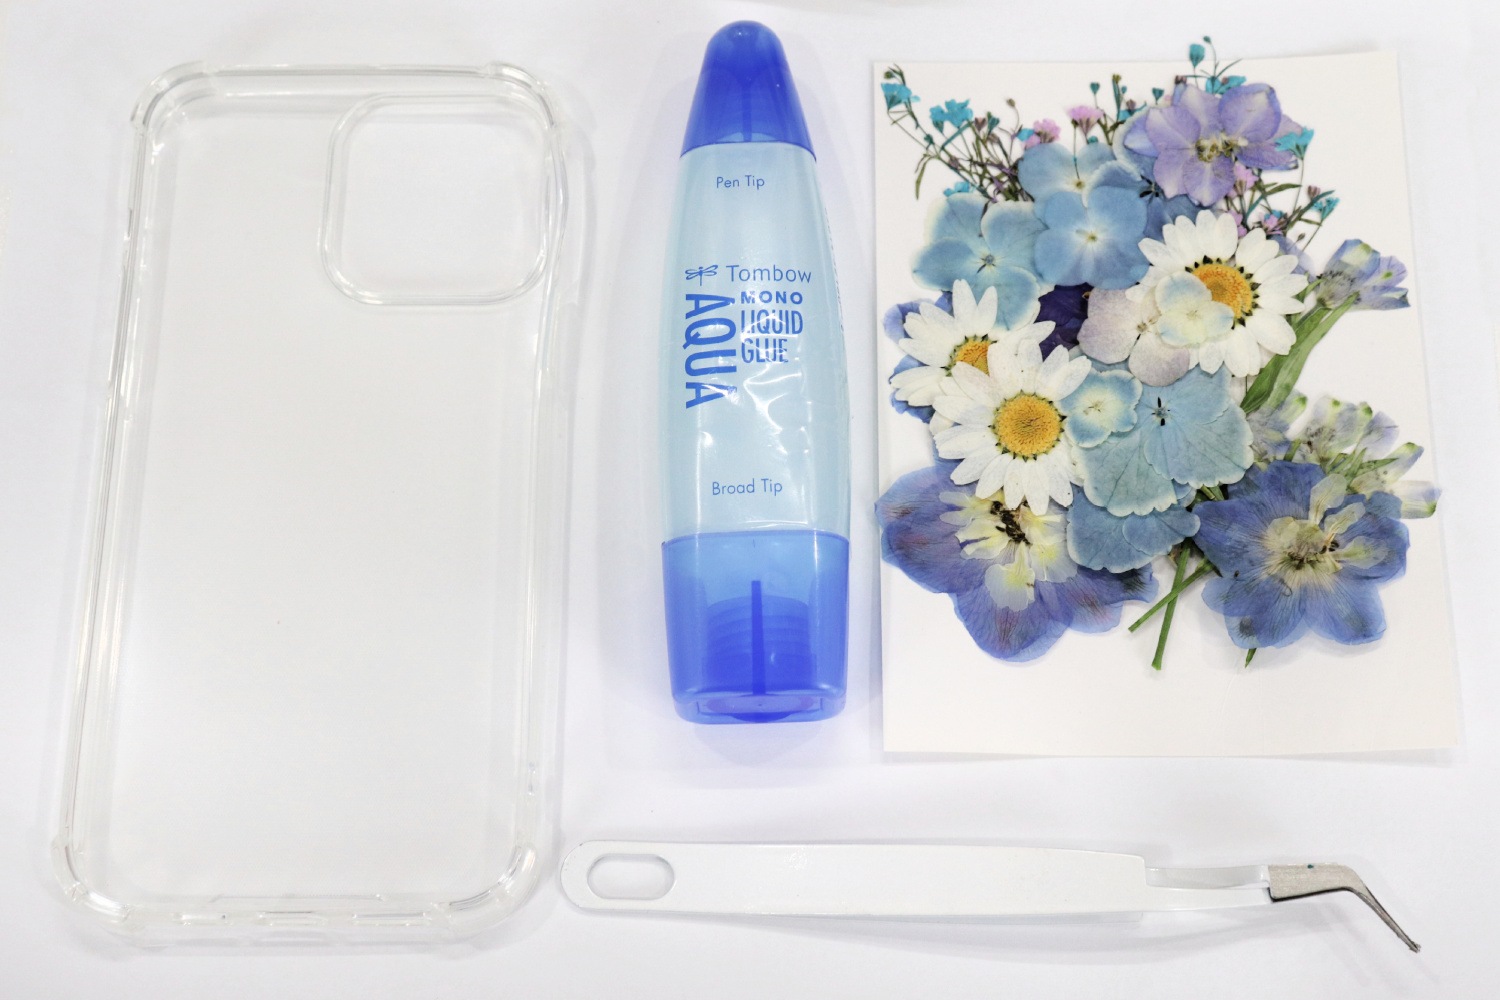 Image contains a clear phone case, a tube of Tombow MONO Aqua Liquid Glue, a pair of tweezers, and an assortment of blue and white pressed flowers on a white background.